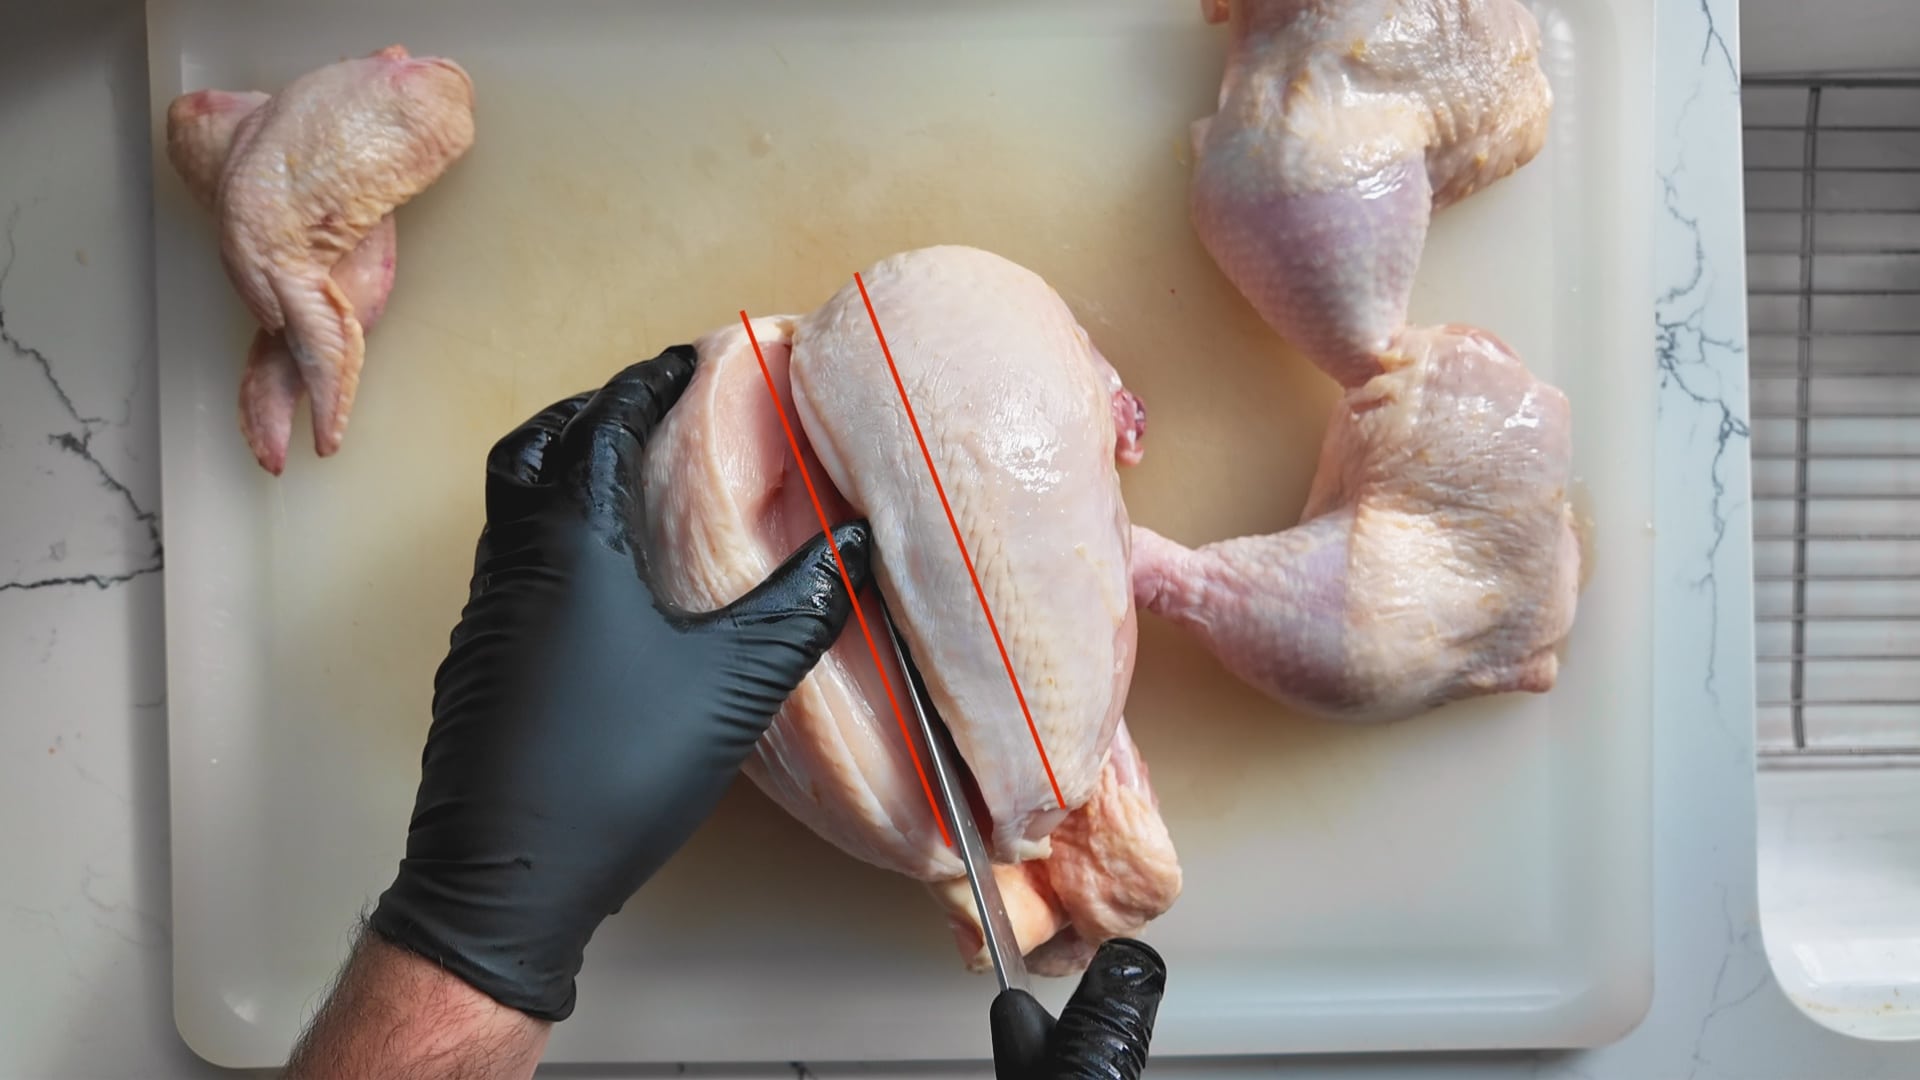 cutting the breasts off a whole chicken